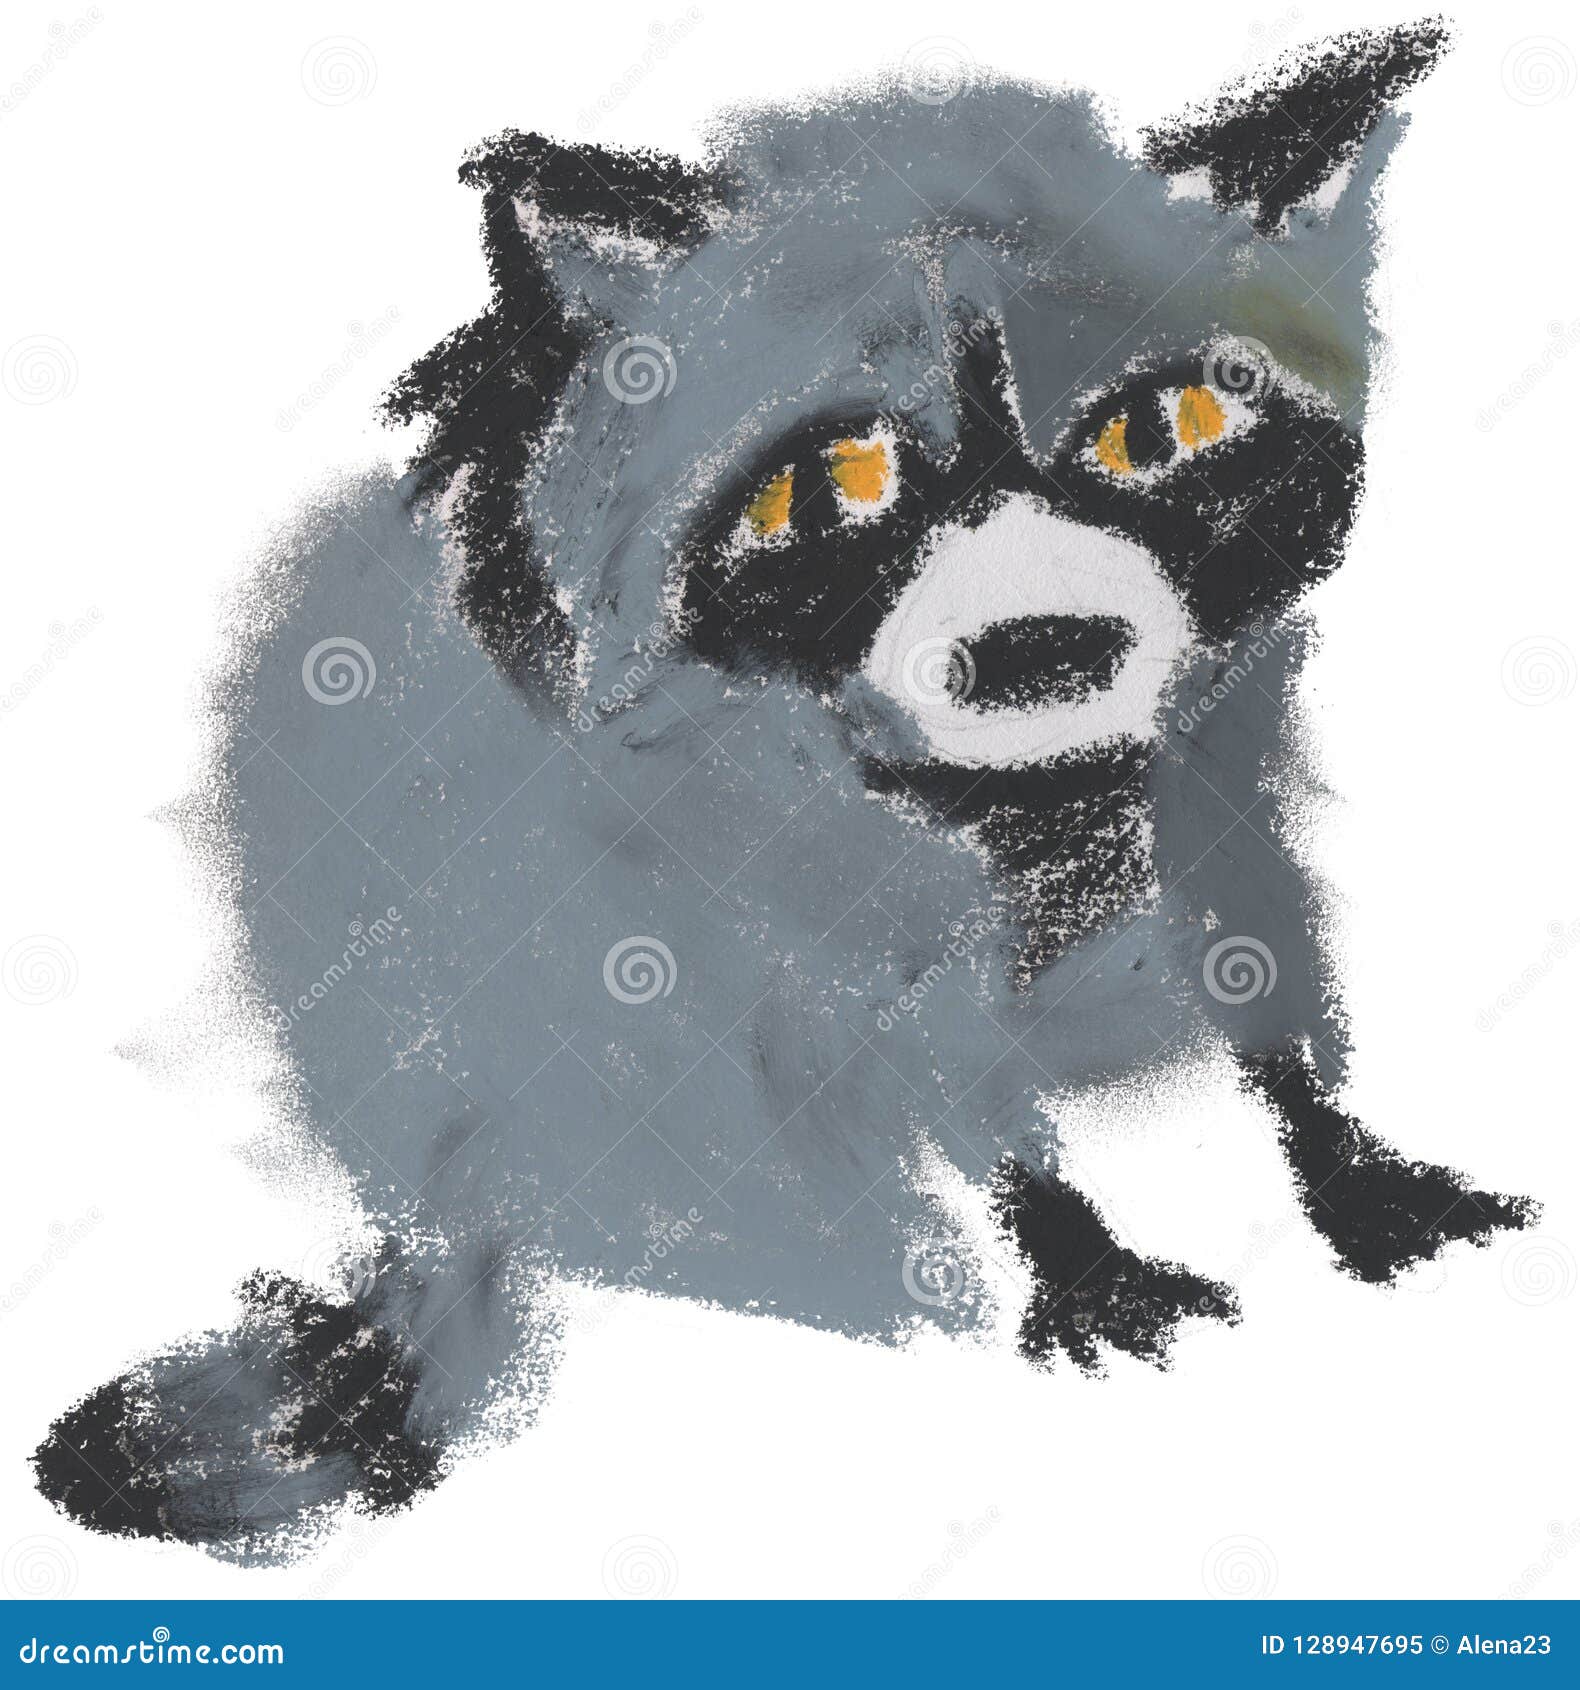 the hand painted oil paste raccoon